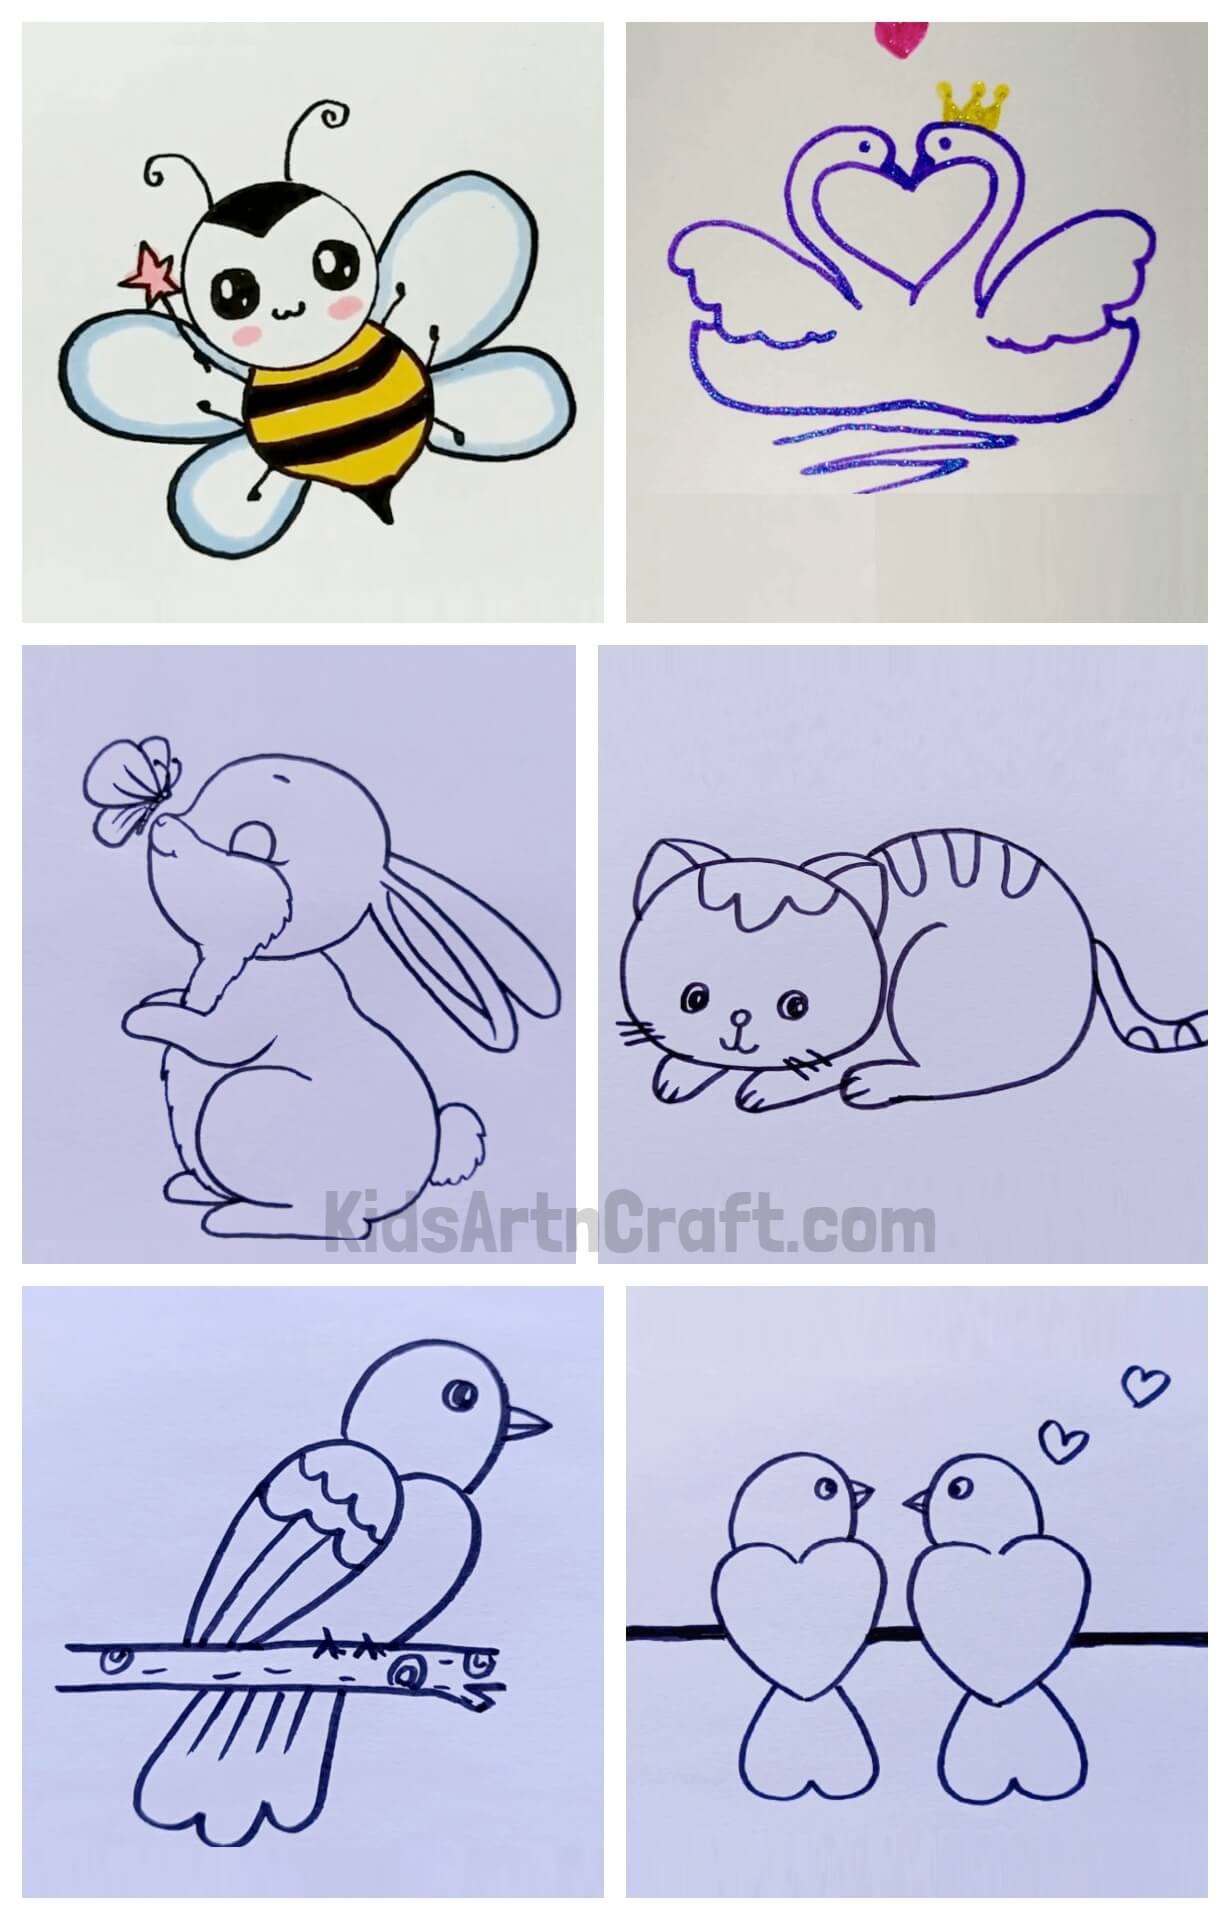 Let's Draw Cute Creatures From Nature's Lap